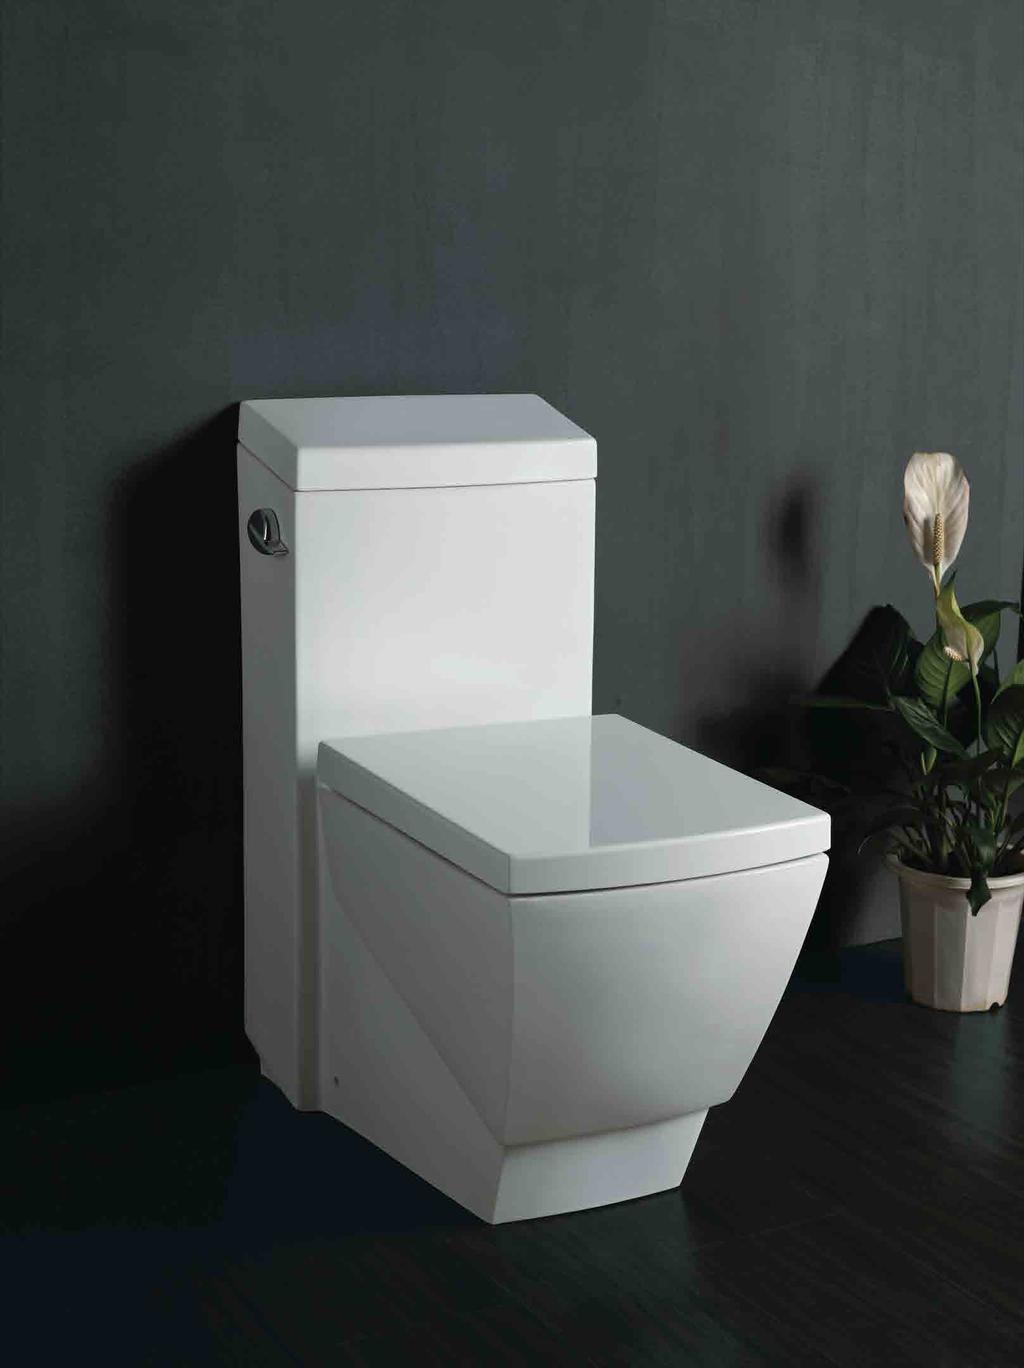 TOILETS SUPERIOR EAGO by Adornus Jet Siphonic one piece toilet W15 x H27 3/4 x L31 3/4 Bowl height: 16 1/4 Water consumption: 4.